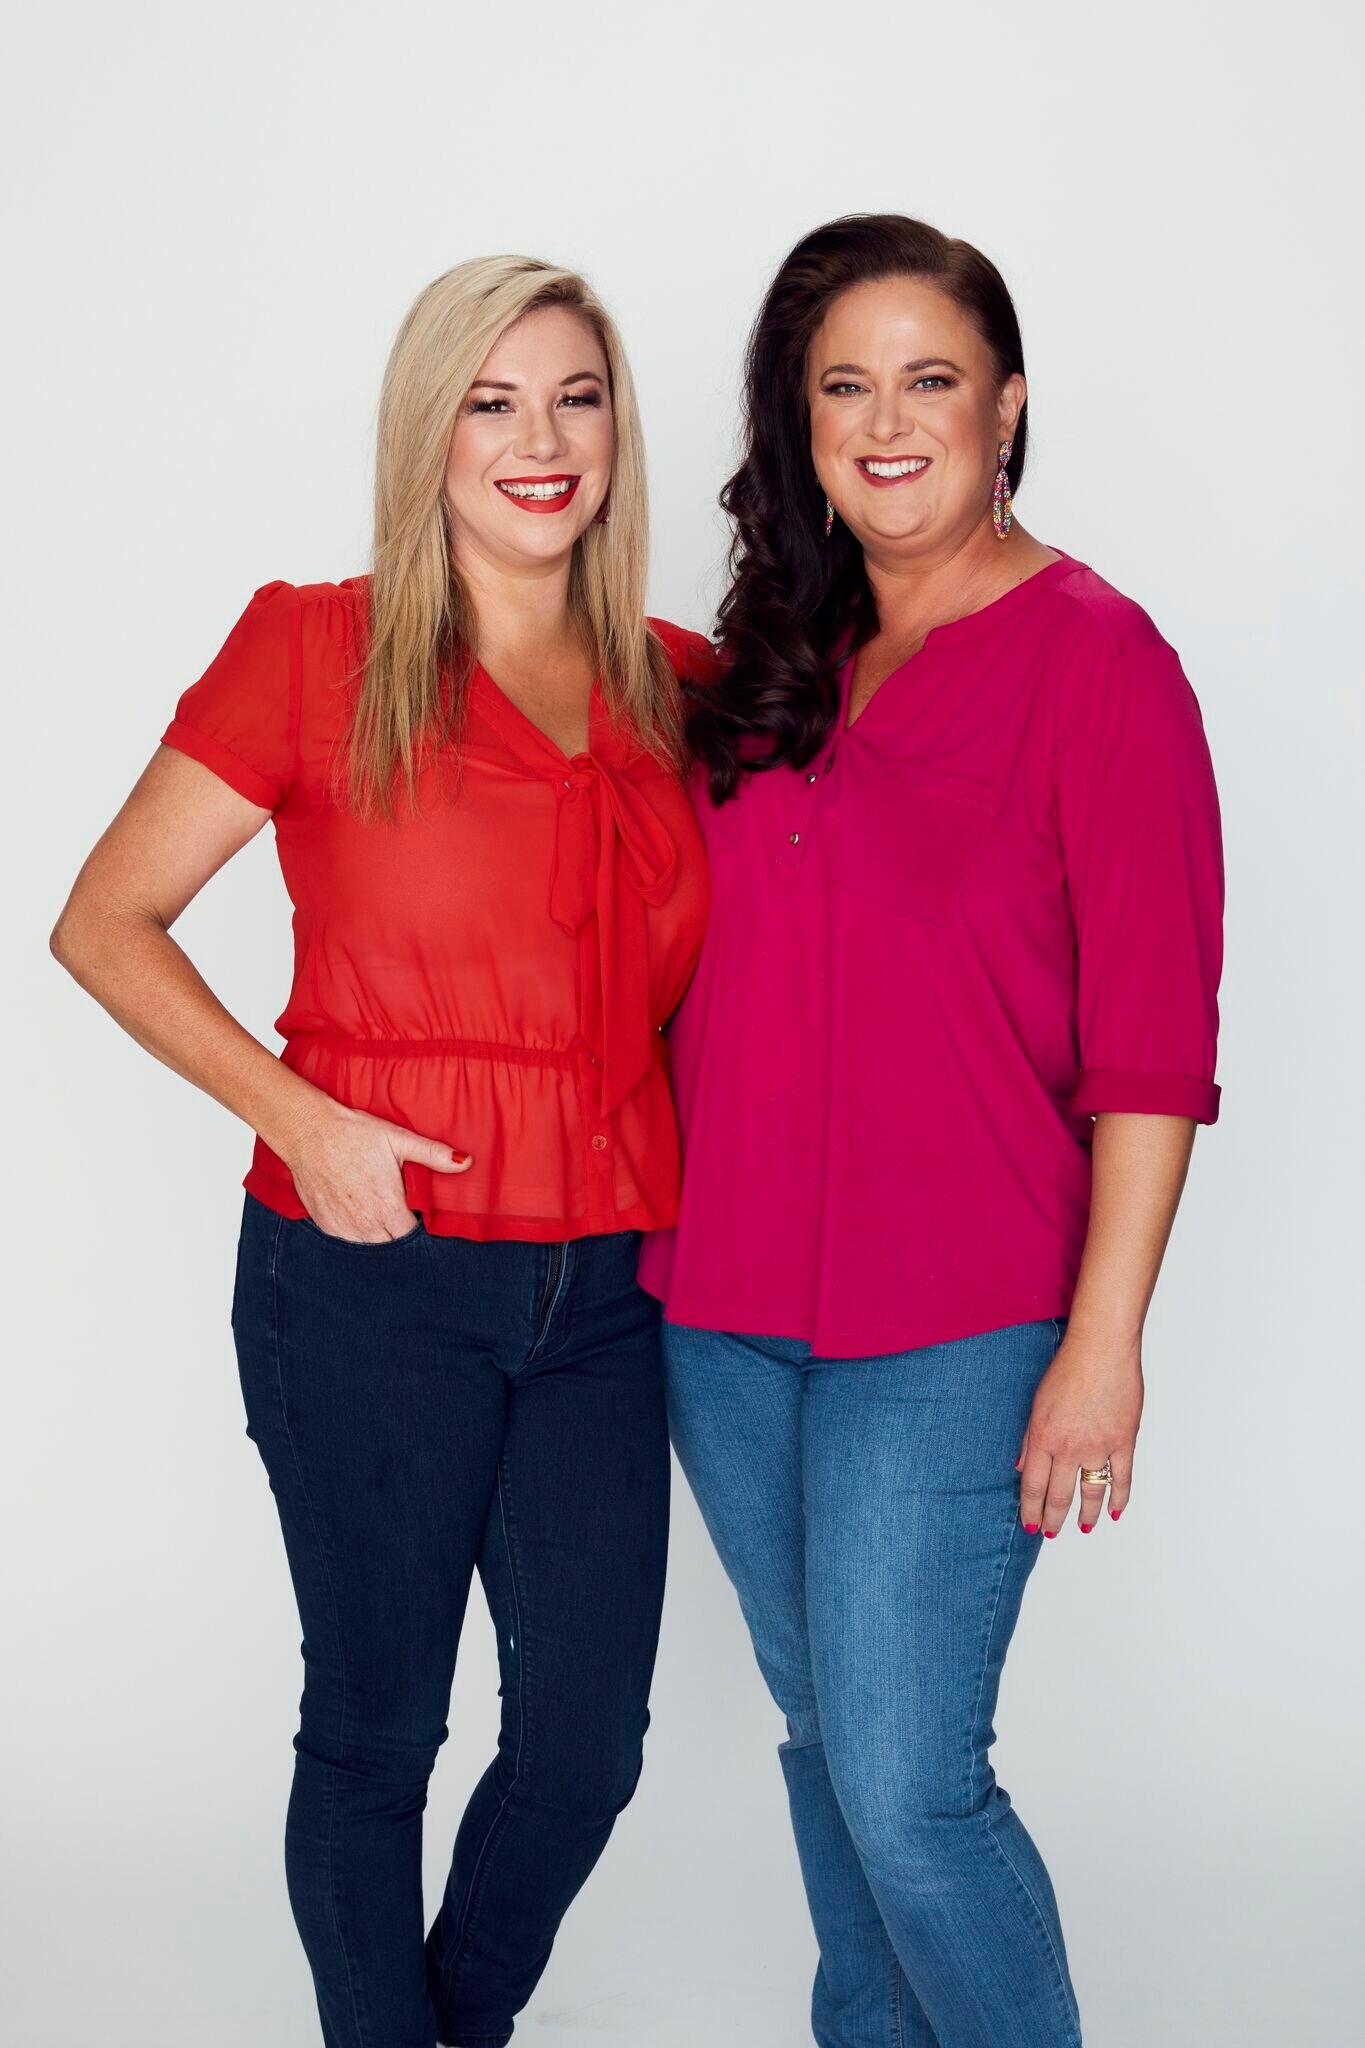   My Kitchen Rules: The Rivals  Source: Seven Network  